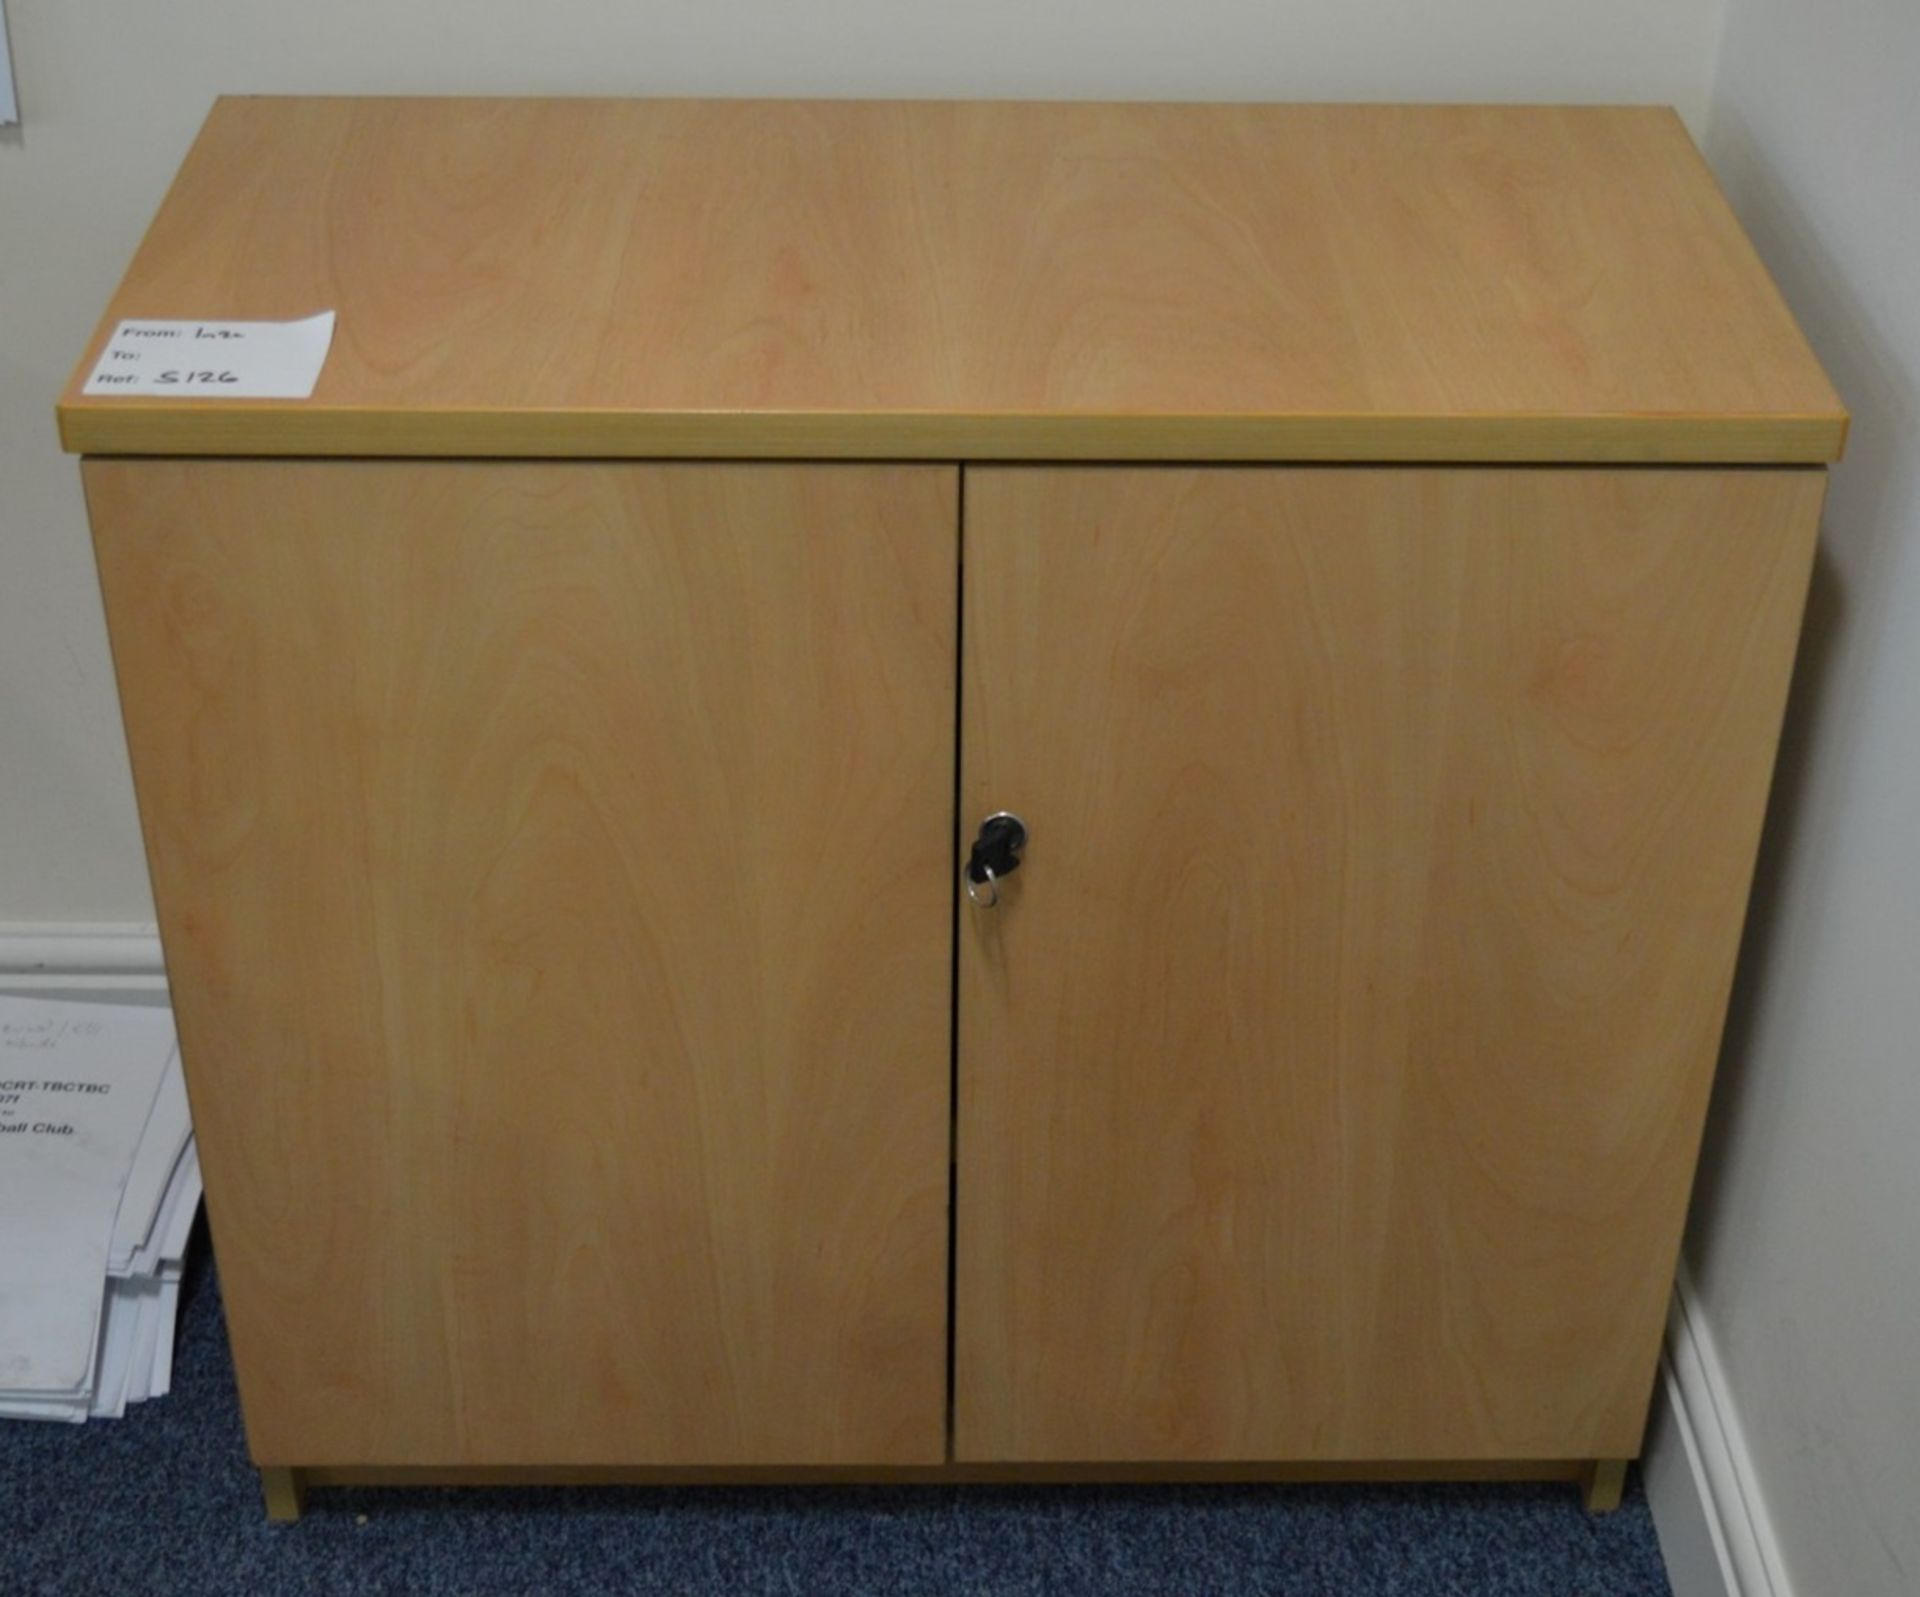 1 x Beech Office Storage Cabinet With Adjustable Internal Shelf and Key - CL300 - Ref S126 - H75 x